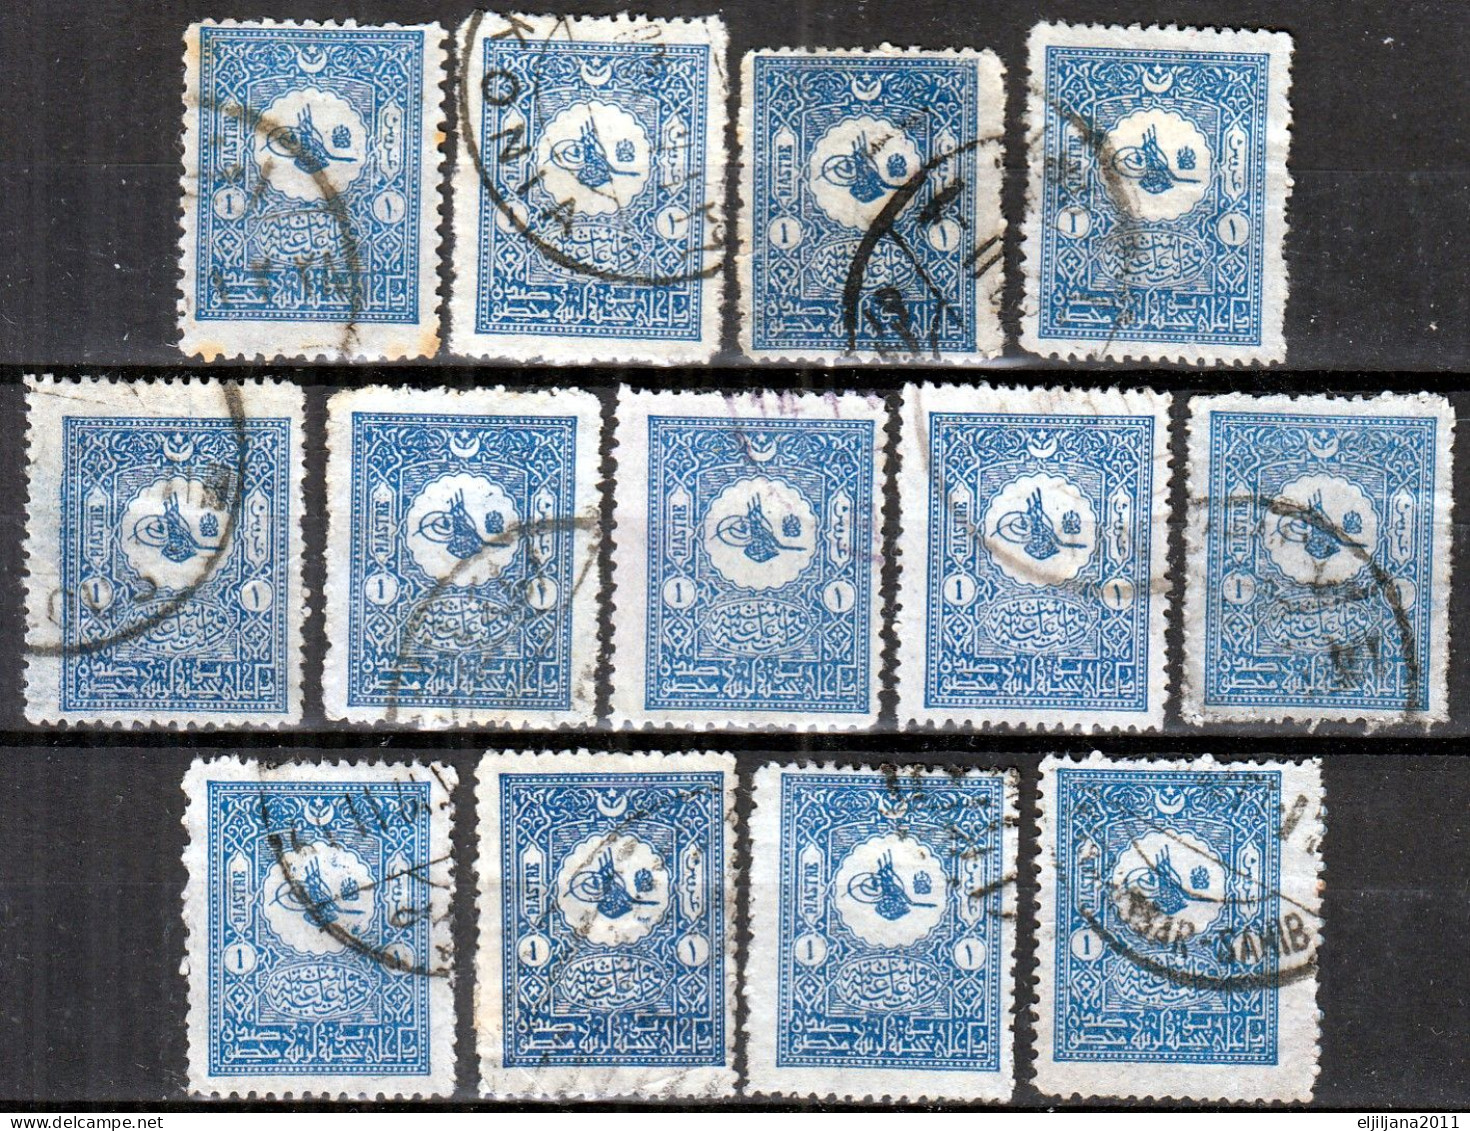 ⁕ Turkey 1901 - 1905 ⁕ Ottoman Empire / Tughra, Domestic Post 1 Pia. Mi.89 ⁕ 64v Used - Shades (unchecked Perf.) Scan - Used Stamps